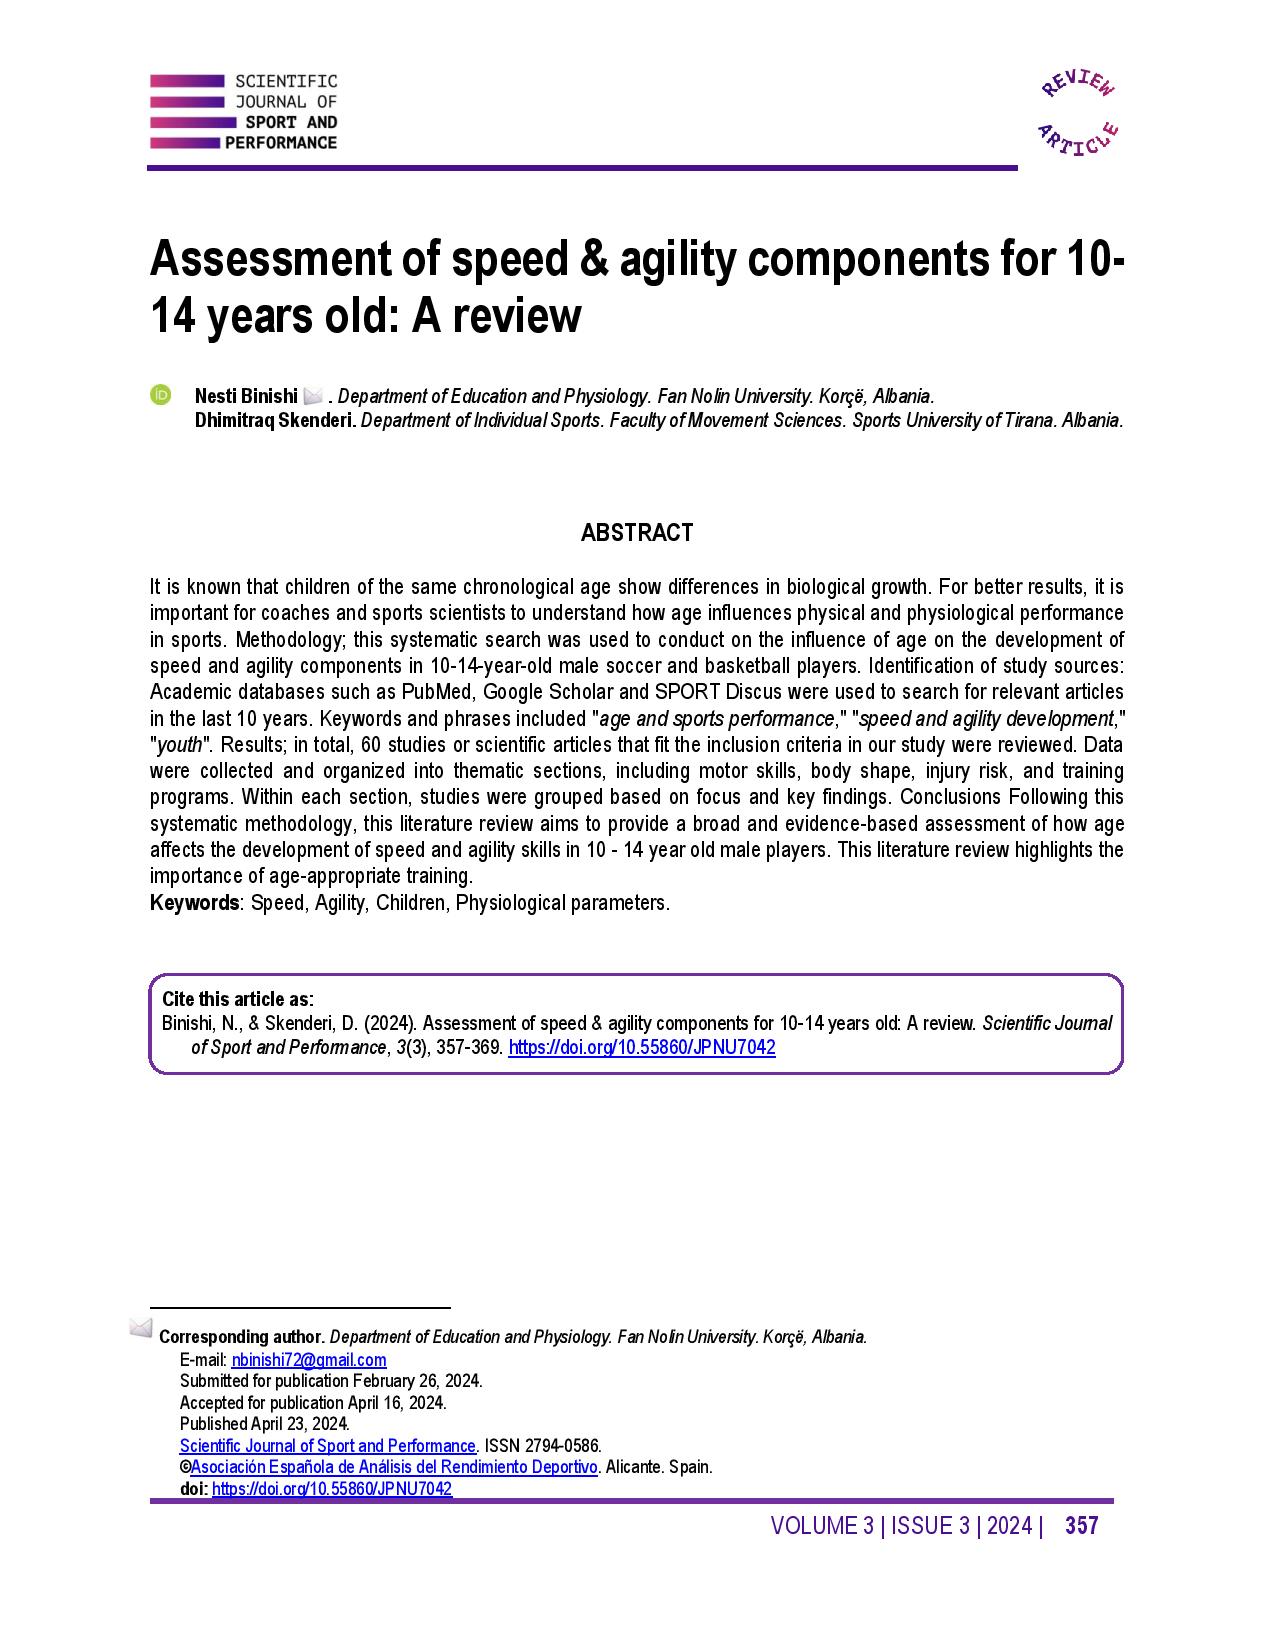 Assessment of speed & agility components for 10-14 years old: A review